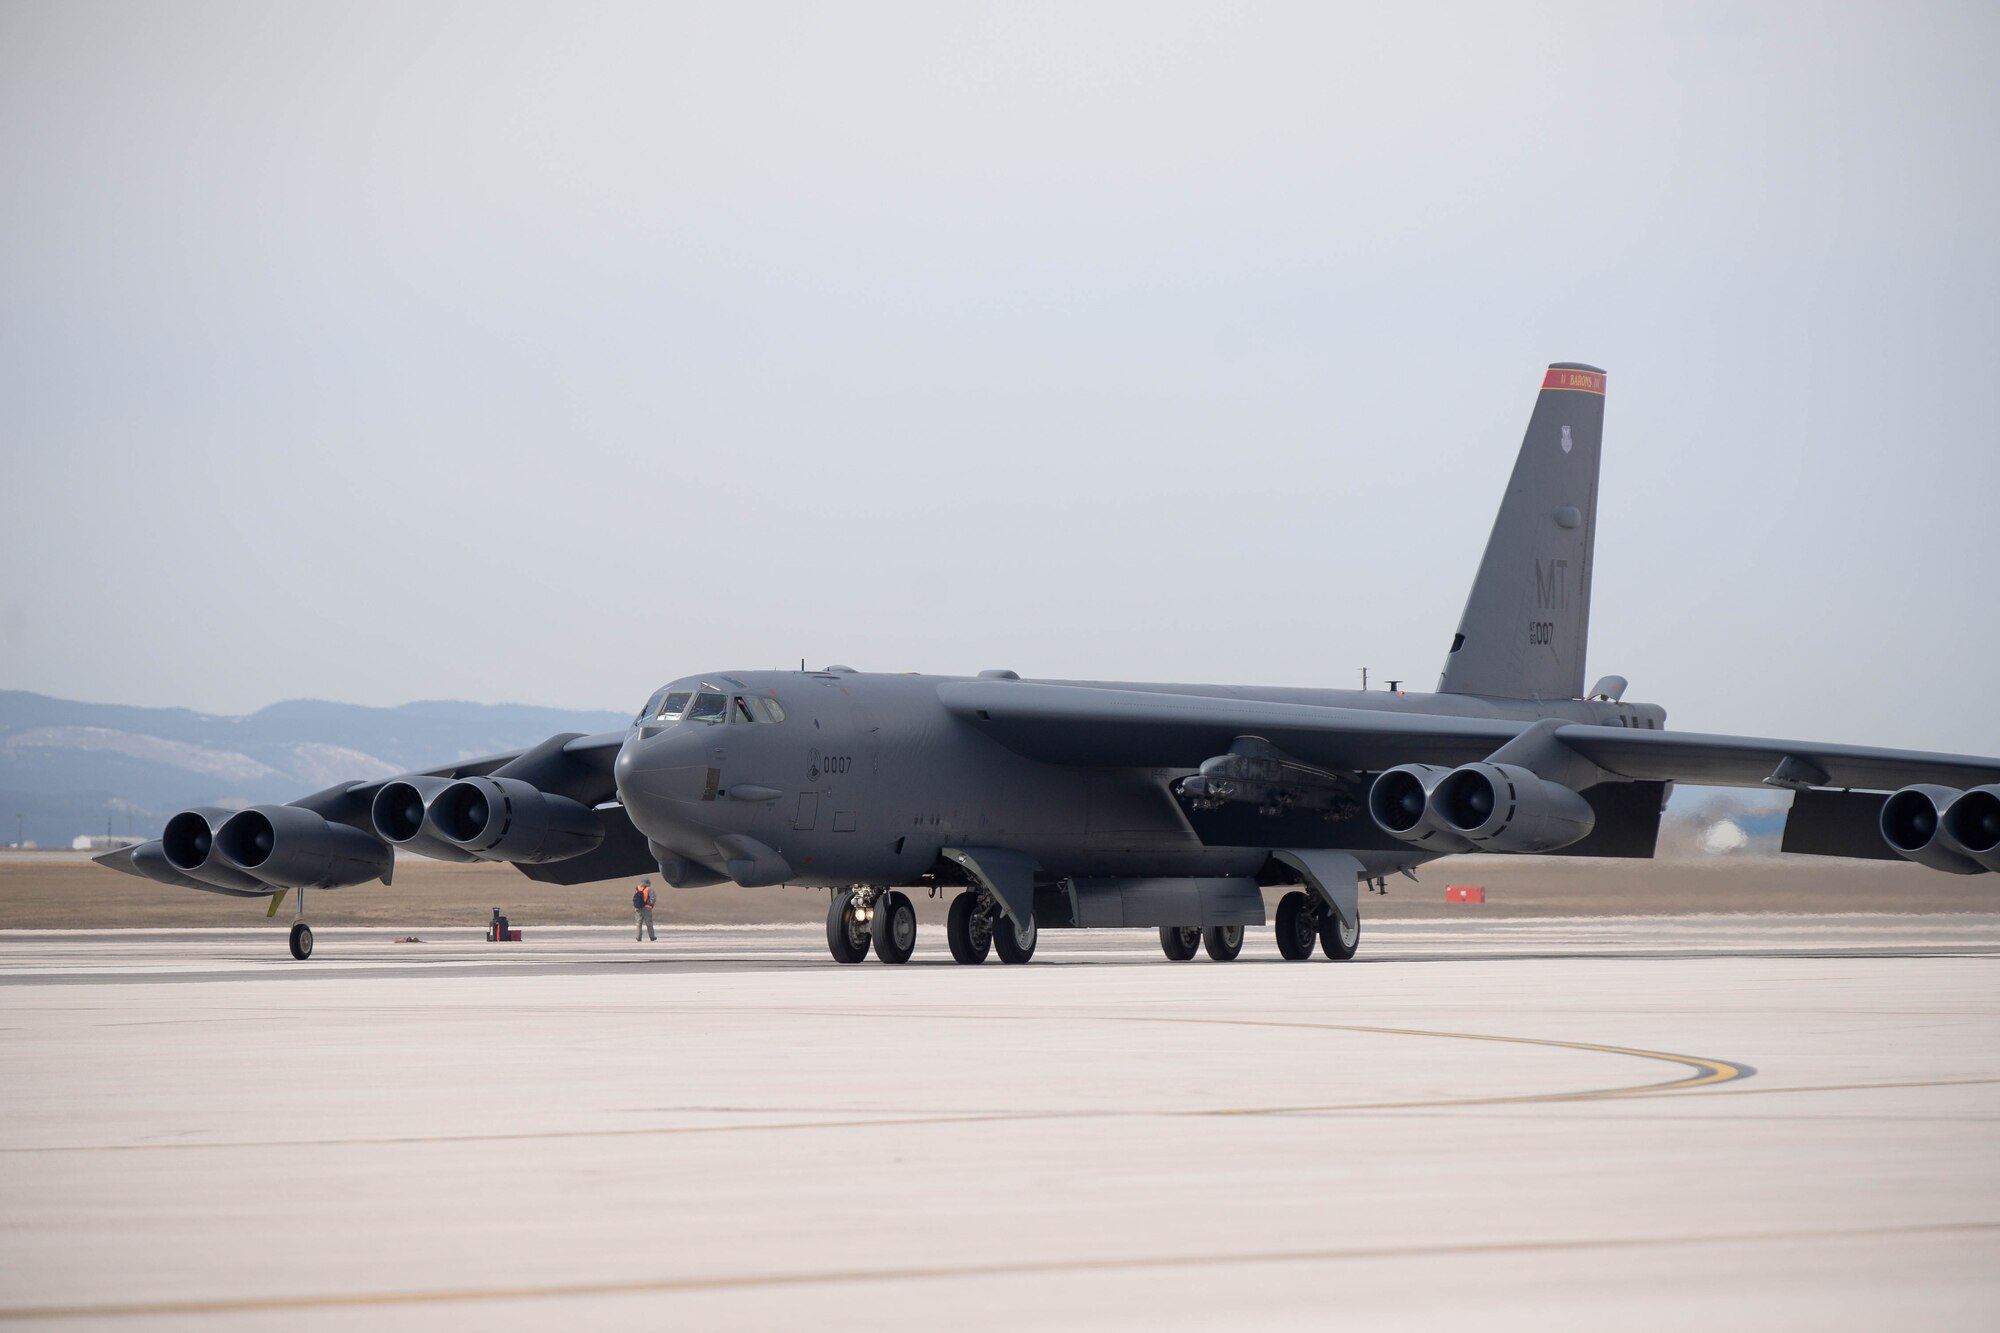 A B-52H Stratofortress from the 5th Bomb Wing at Minot Air Force Base, N.D., arrives at Ellsworth AFB, S.D., March 26, 2014. Approximately eight B-52s and about 300 Airmen from Minot will be on temporary duty at Ellsworth until October due to a much-needed runway reconstruction project at Minot. (U.S. Air Force photo by Senior Airman Zachary Hada/Released)